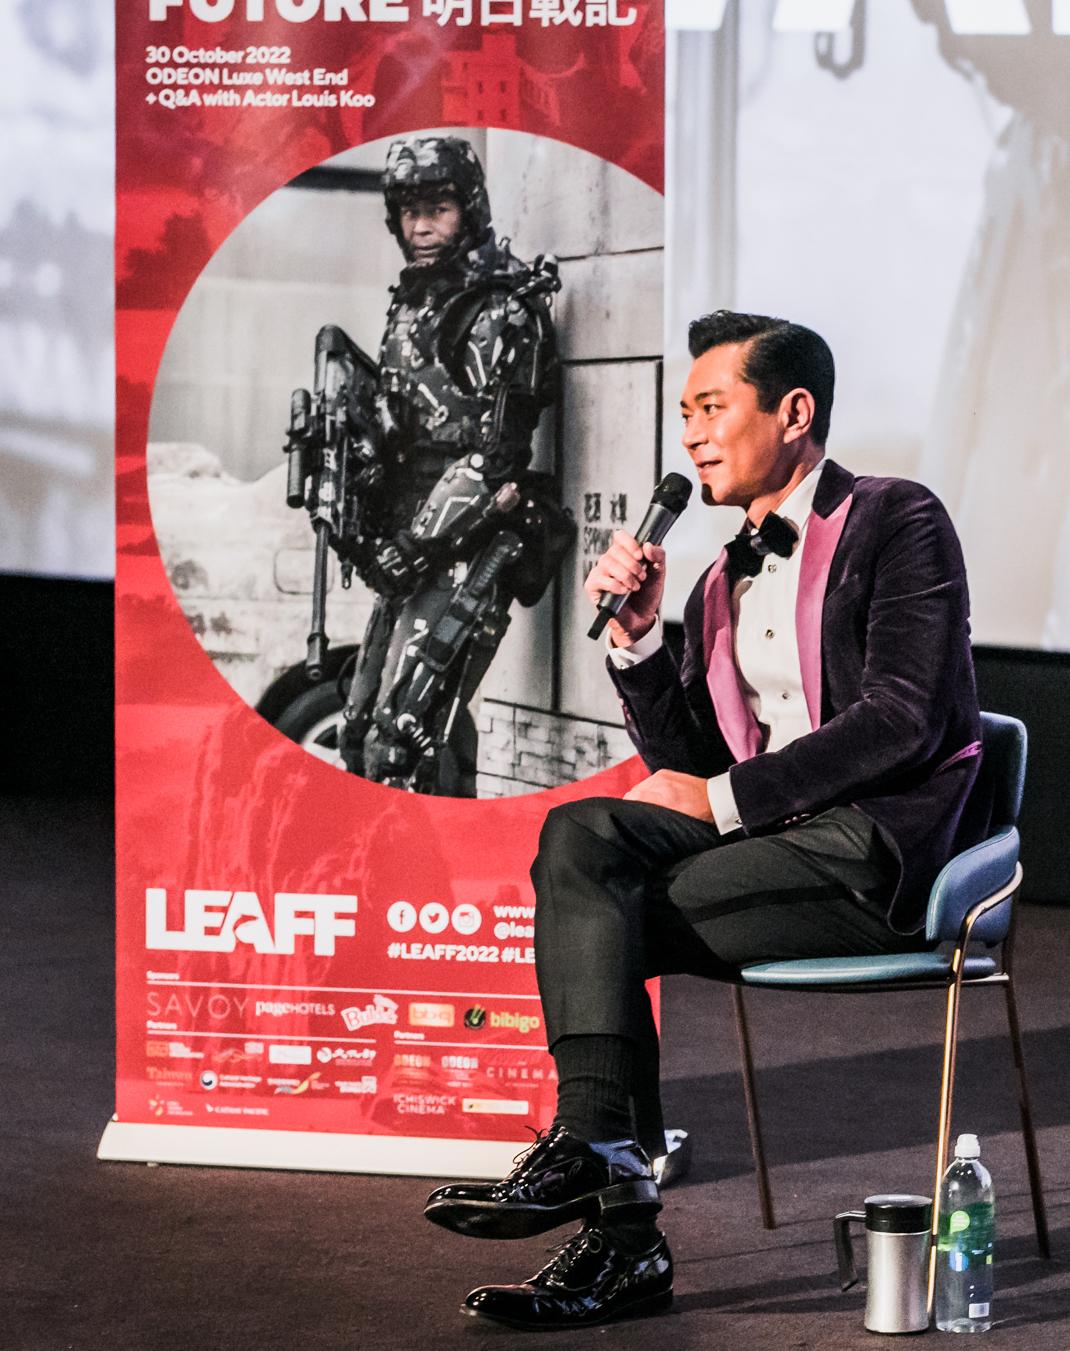 To commemorate the 25th anniversary of the establishment of the Hong Kong Special Administrative Region, the Hong Kong Economic and Trade Office, London supported the London East Asia Film Festival, showcasing seven Hong Kong films in London from October 19 to 30 (London time). Photo shows Hong Kong actor Louis Koo exchanging views with the audience at a question-and-answer session of the film festival.  